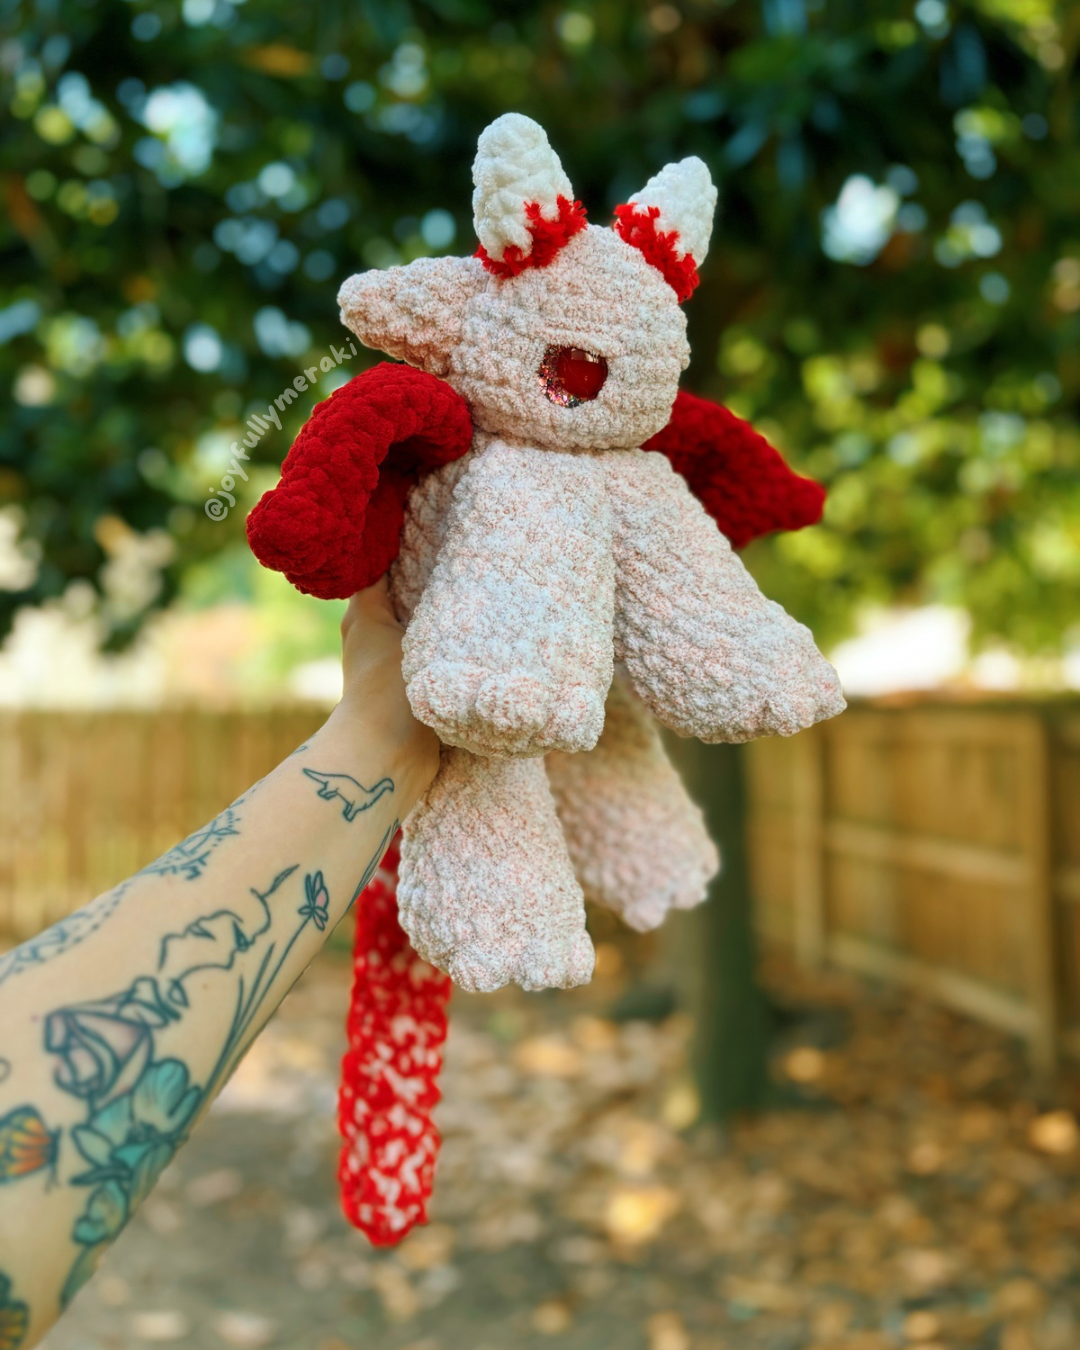 Forest Nymph Crocheted Plushie